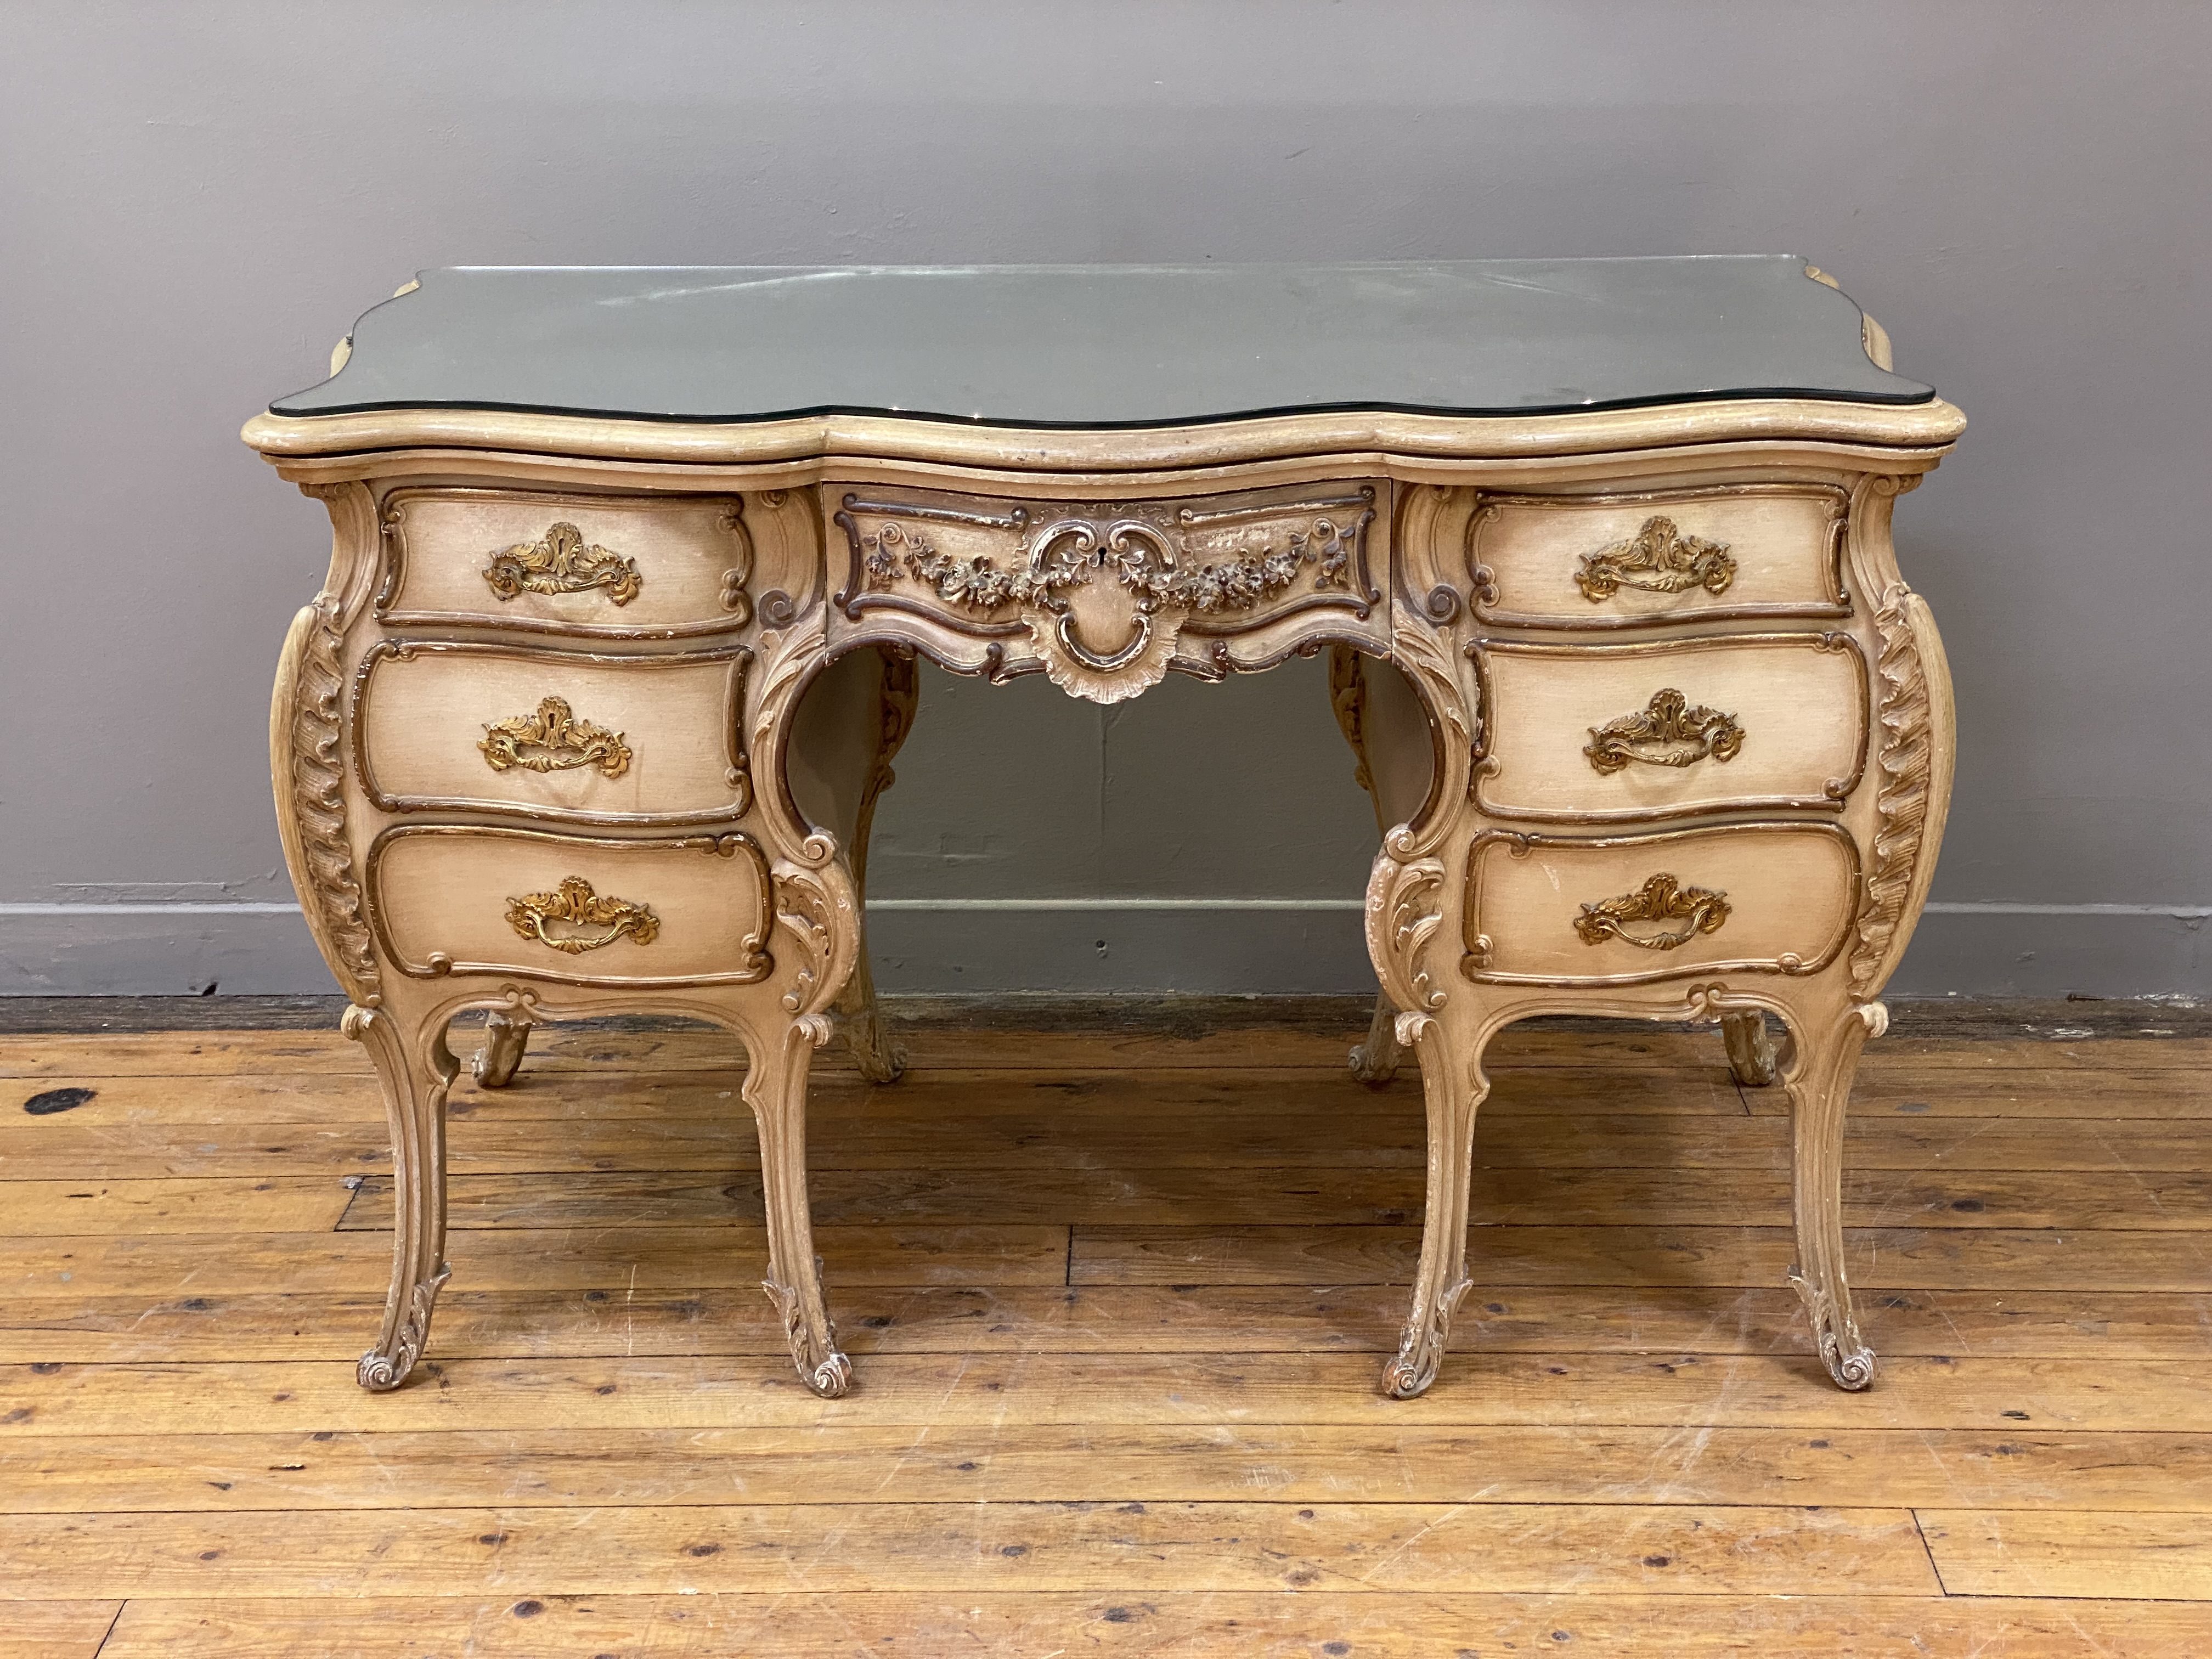 A Neo-Rococo dressing table or desk, late 19th century, cream painted and parcel gilt hardwood, - Image 2 of 5